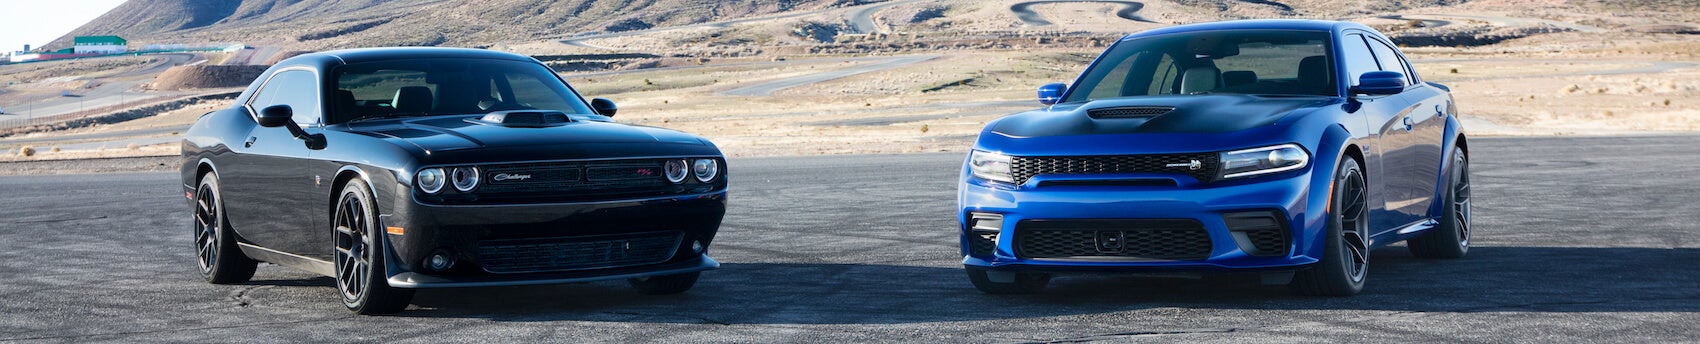 Dodge Charger vs. Ford Mustang